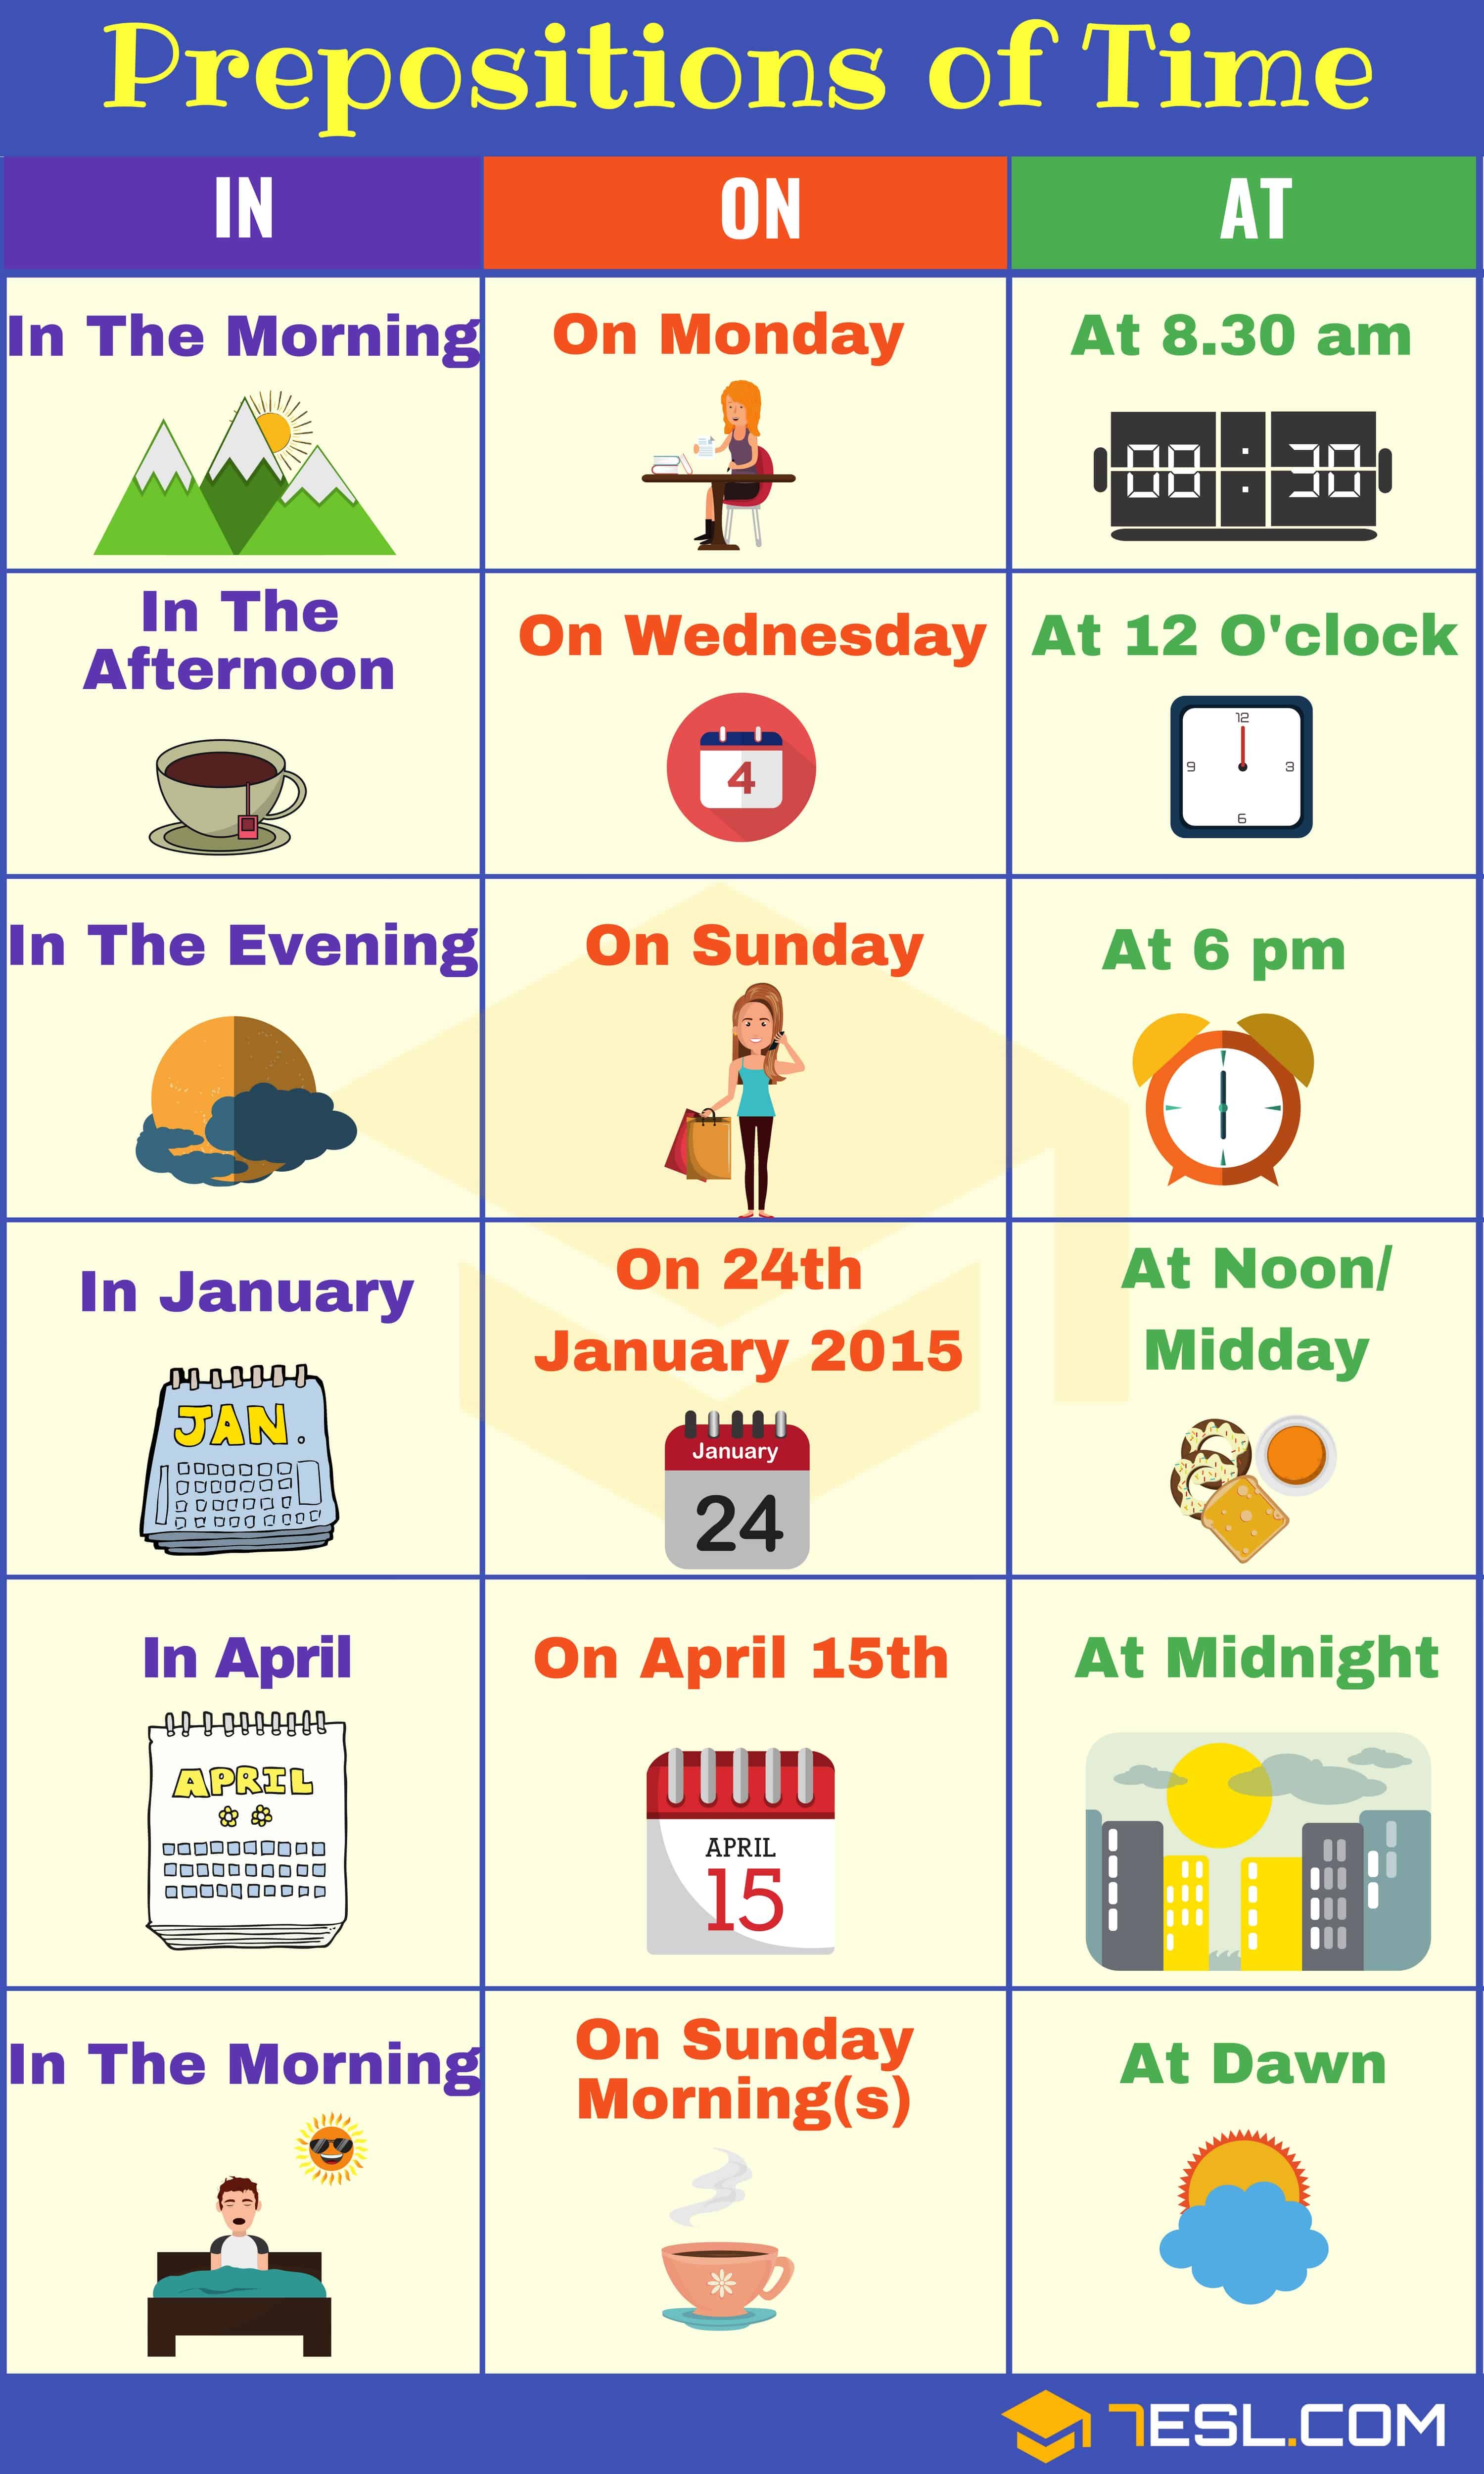 Prepositions Of Time: Definition, List And Useful Examples